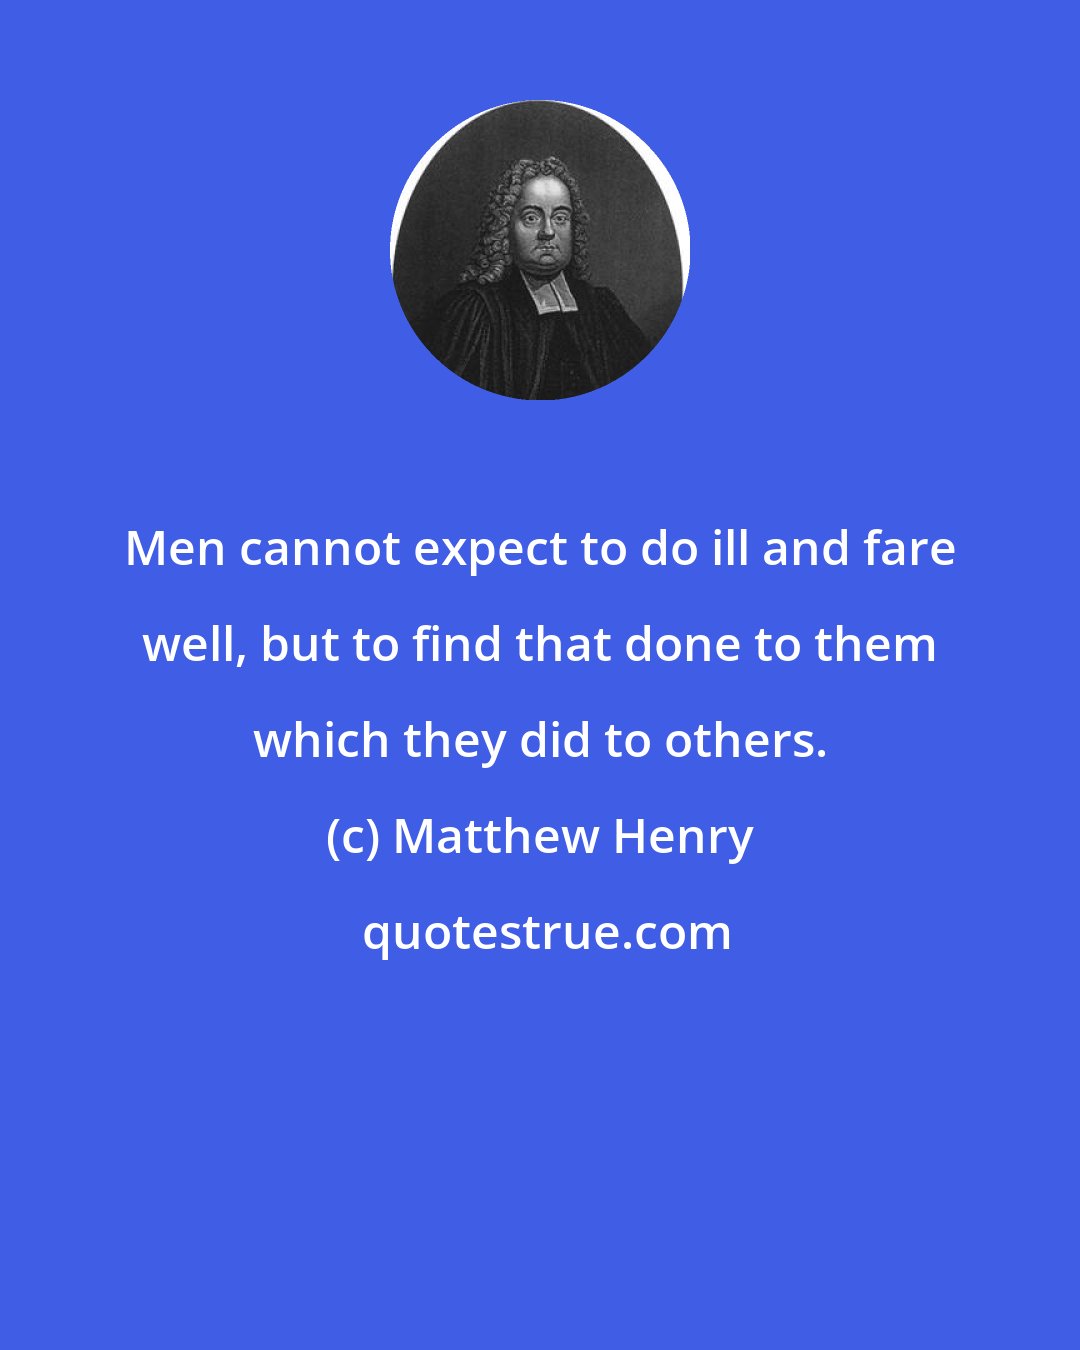 Matthew Henry: Men cannot expect to do ill and fare well, but to find that done to them which they did to others.